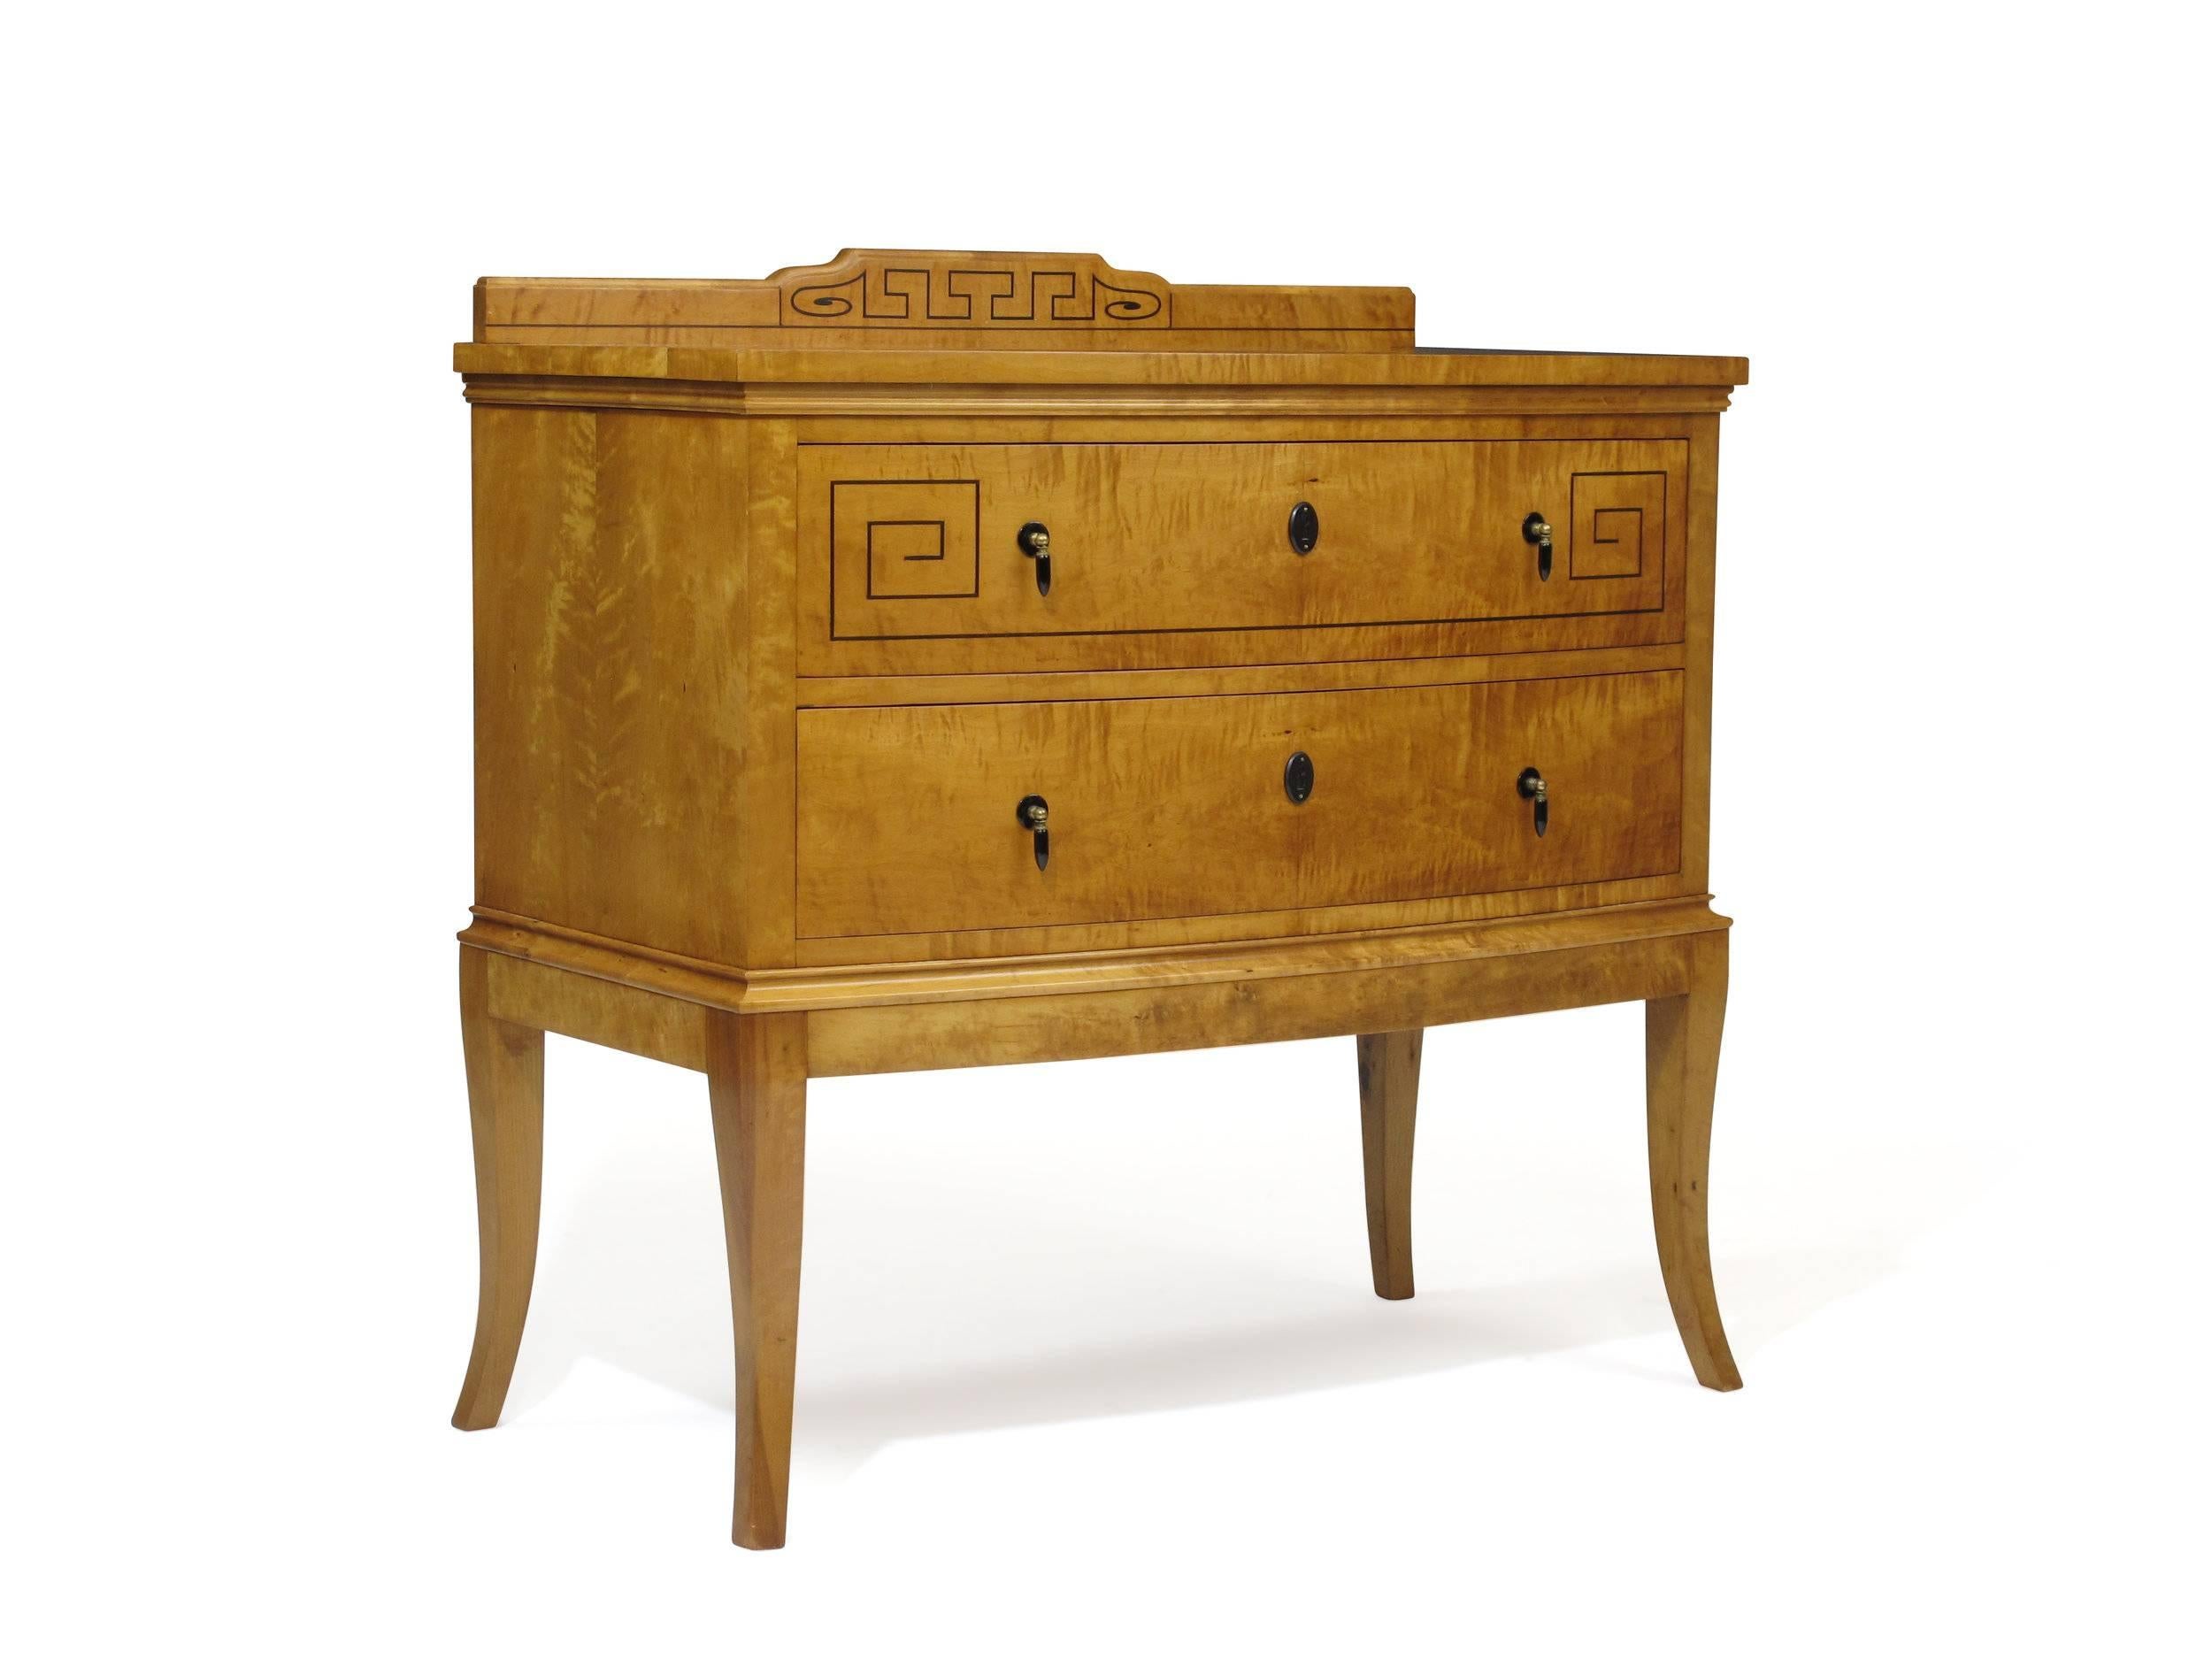 Lacquered European Flamed Birch Chest with Ebony Inlay